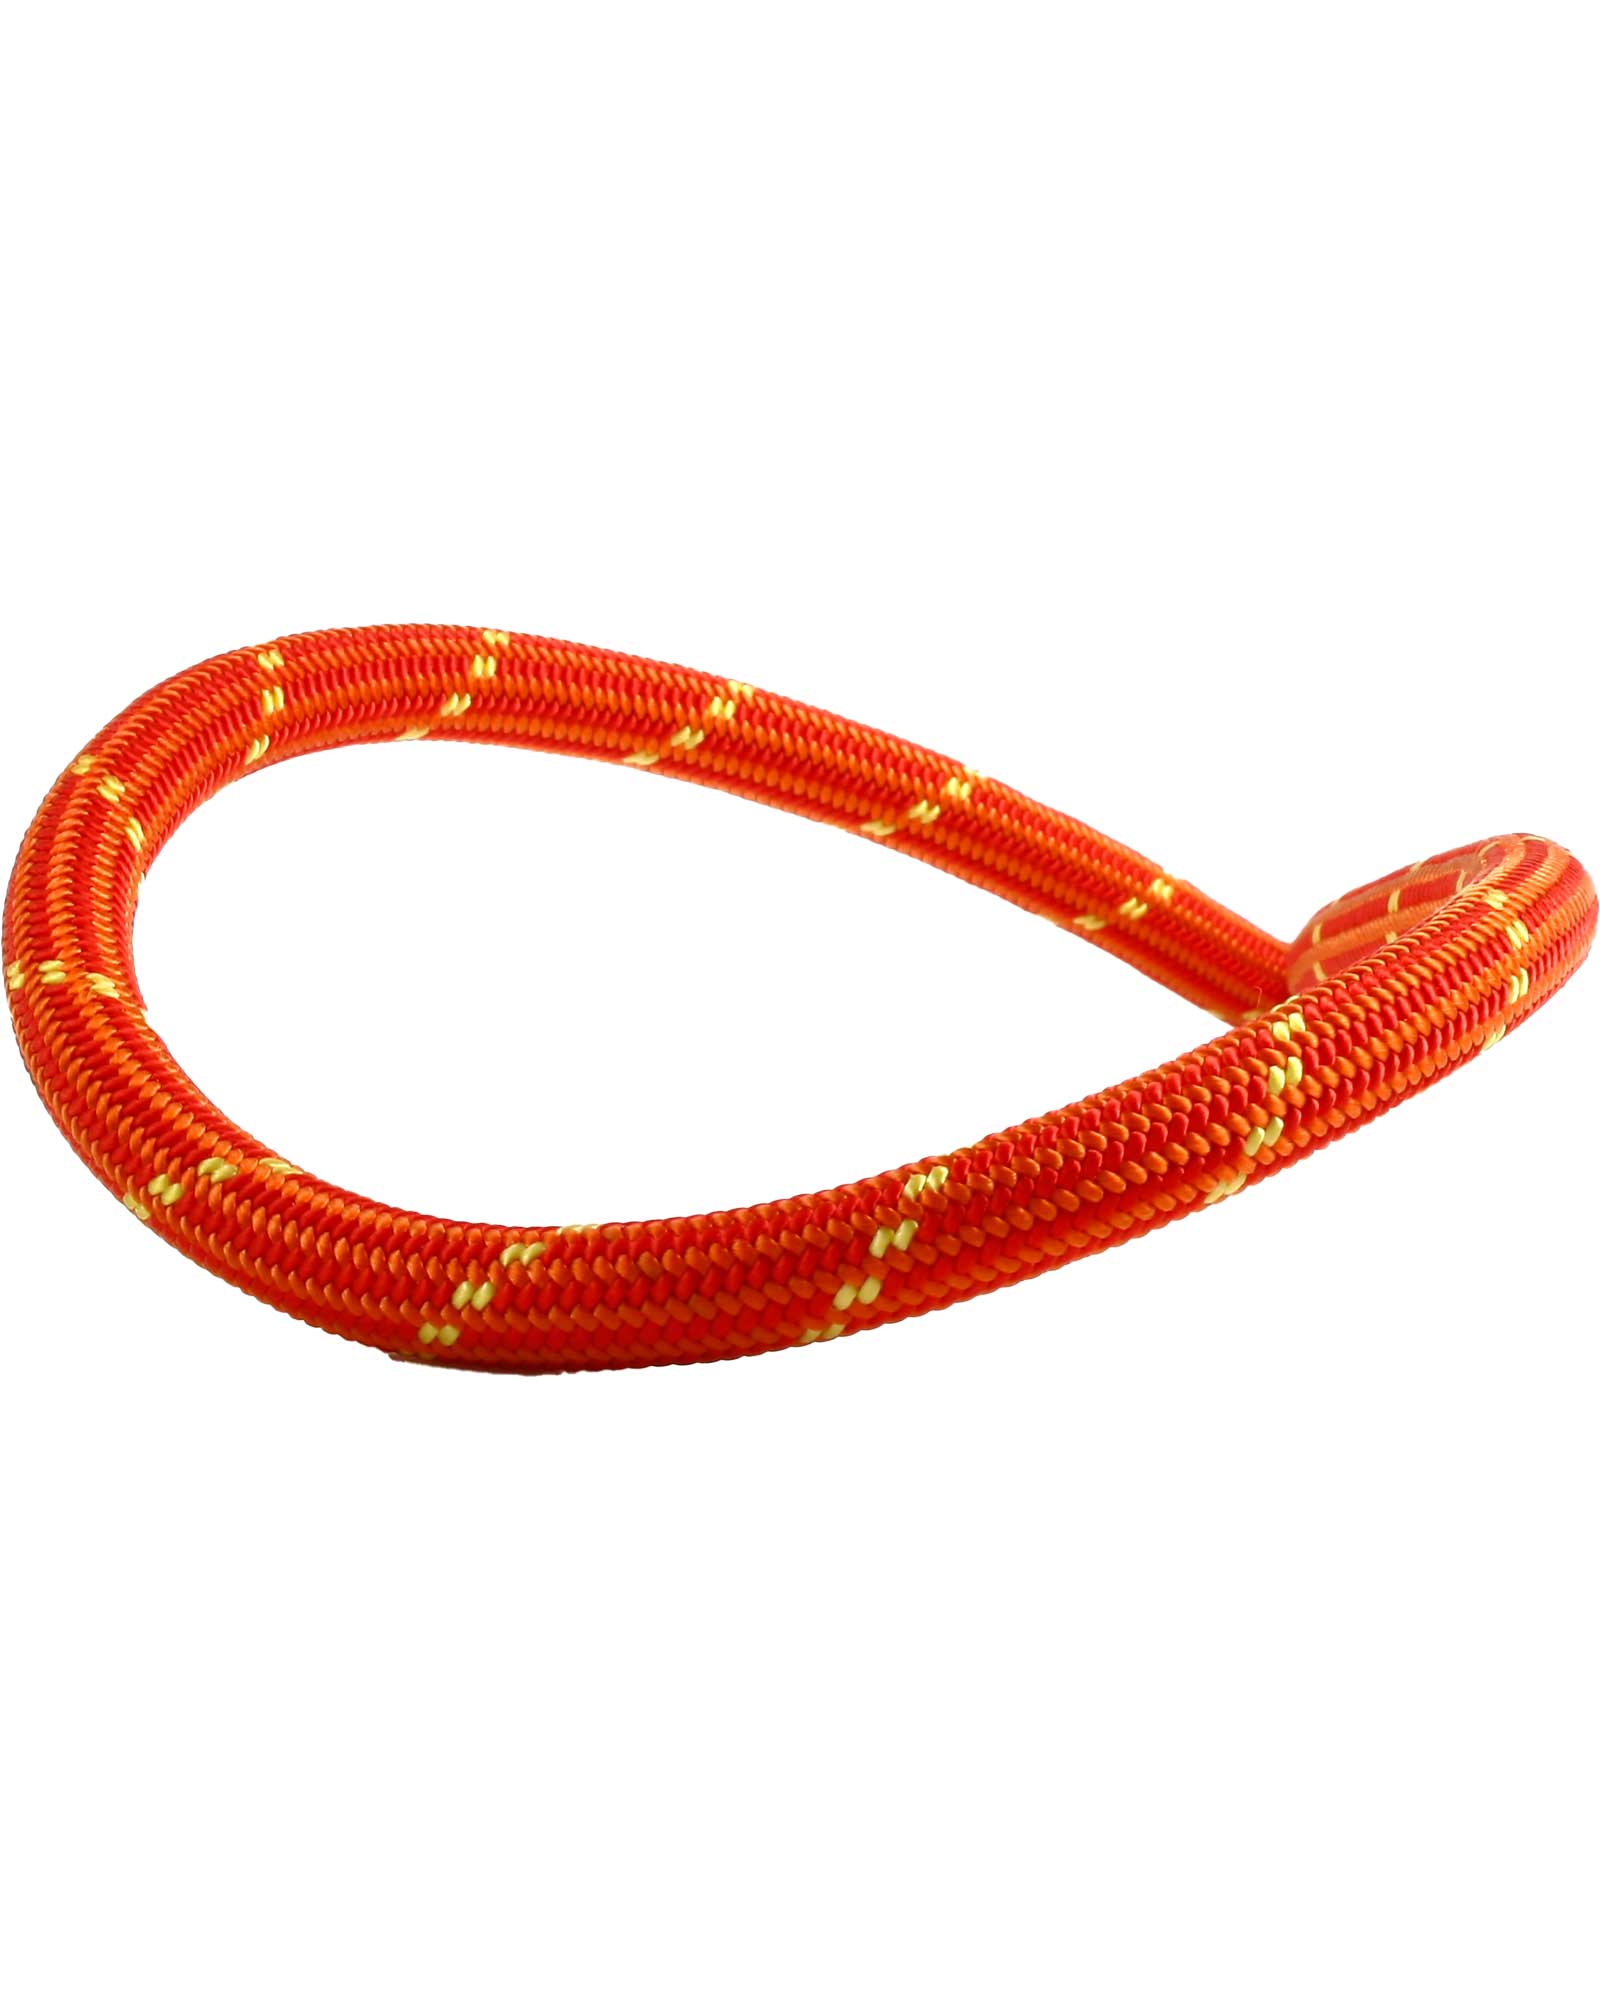 Edelweiss Energy 9.5mm x 60m Rope - Red 60m